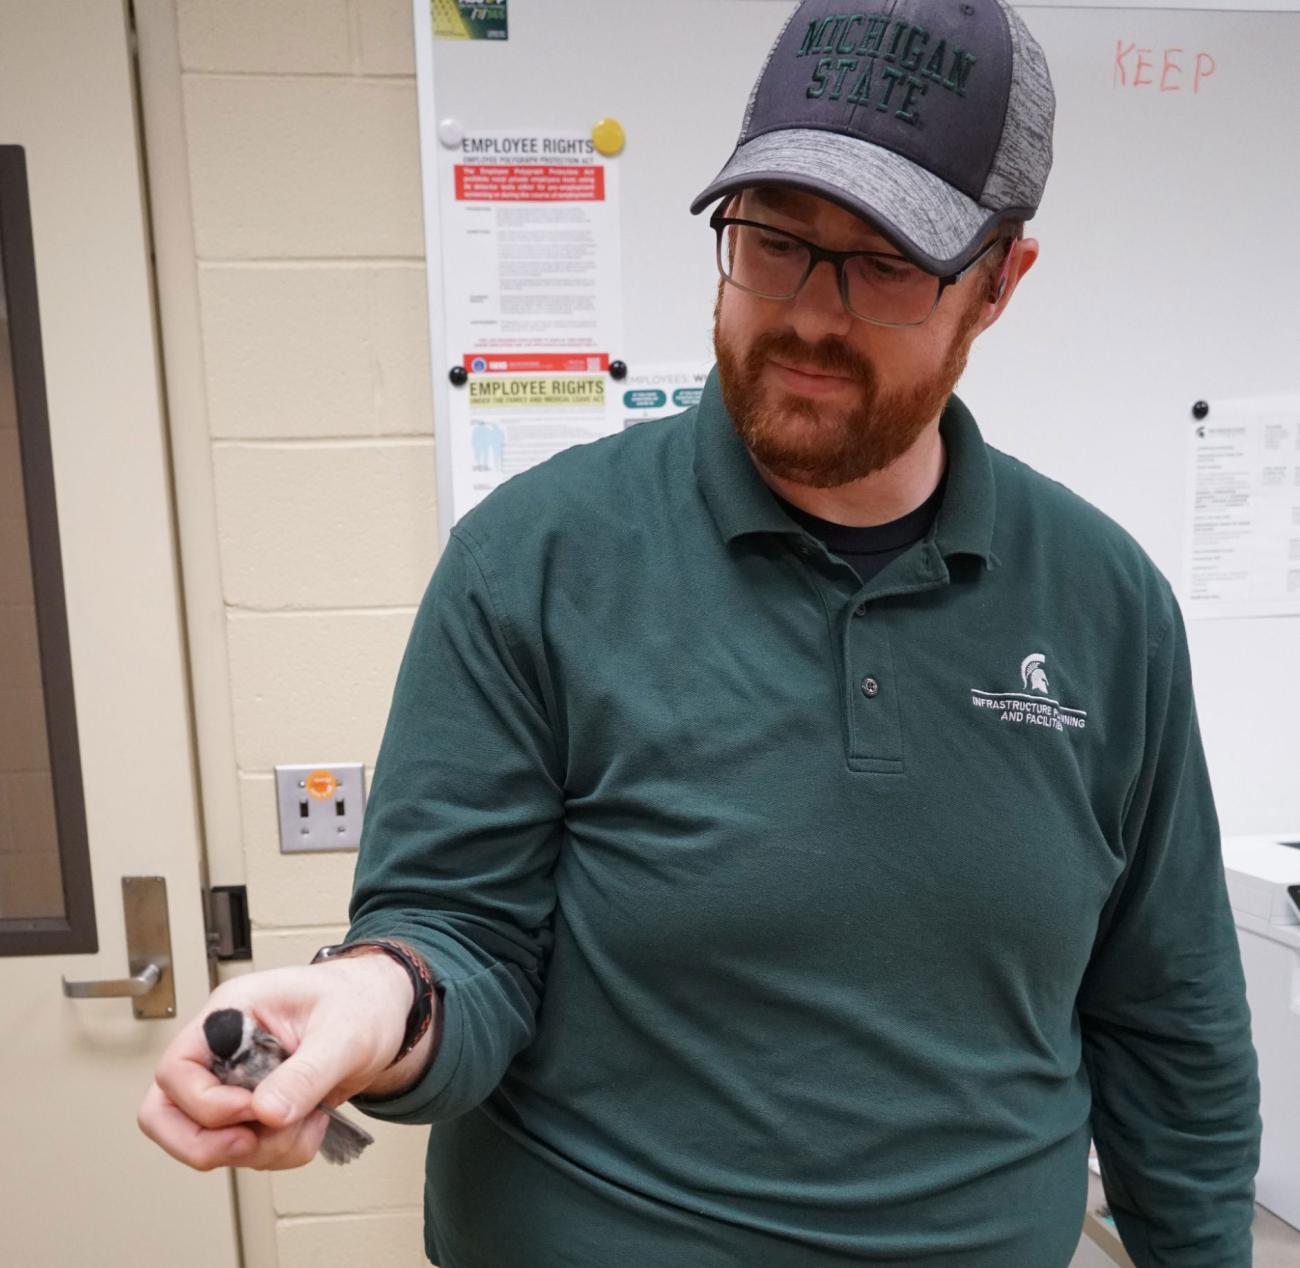 A man with a red beard in a green MSU shirt and grey baseball cap holds a small bird in his hand